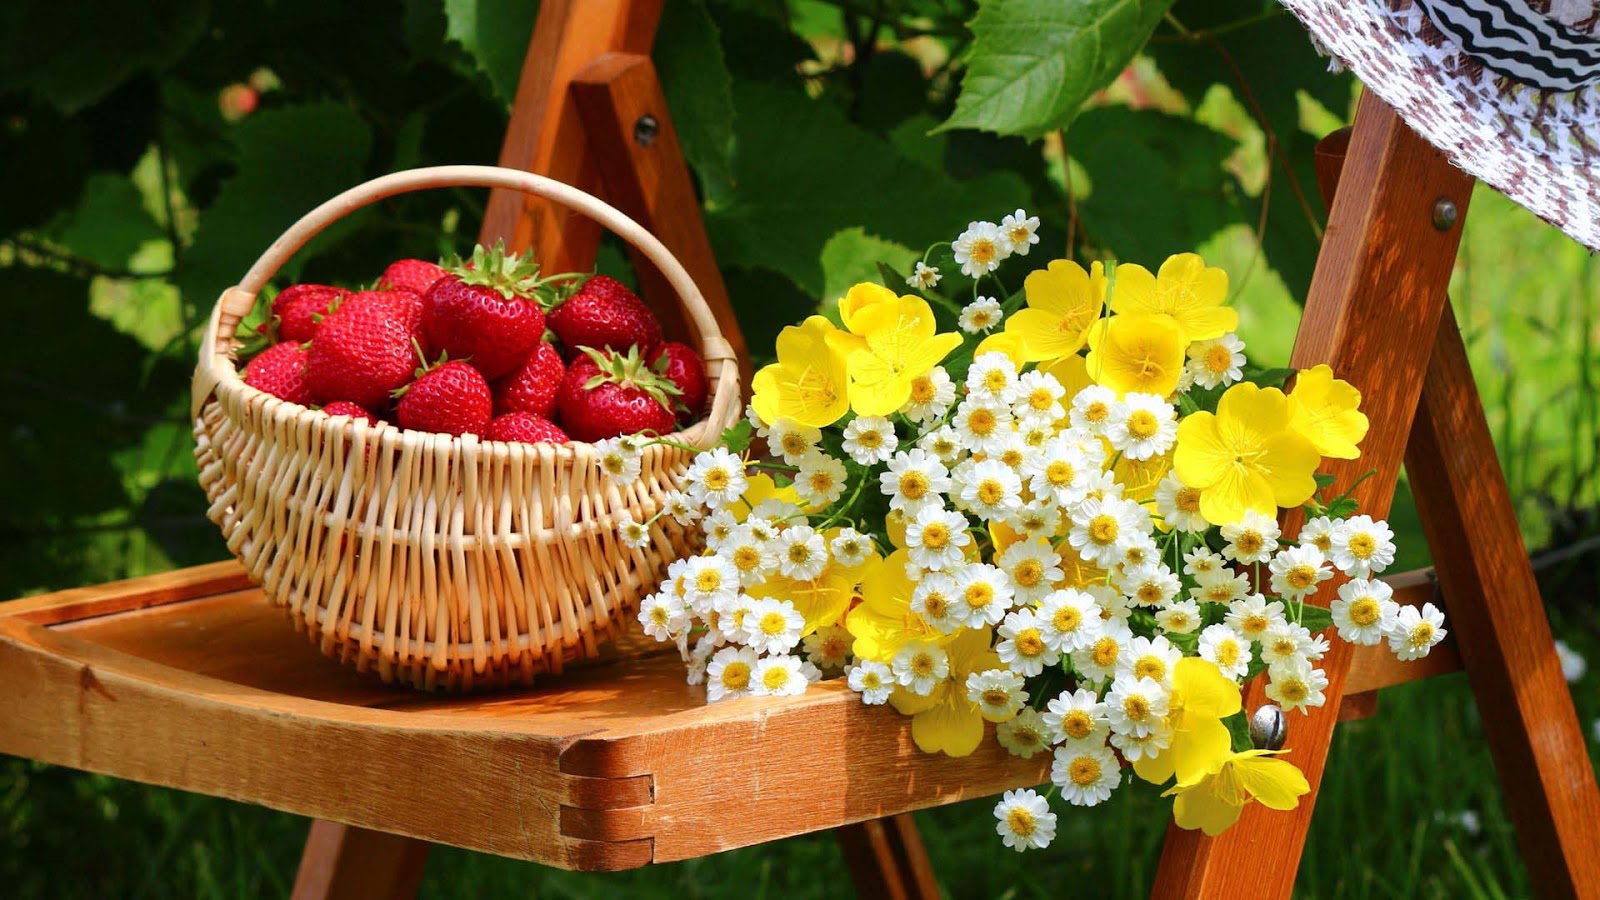 fruits pictures wallpapers,flower,plant,basket,strawberries,fruit